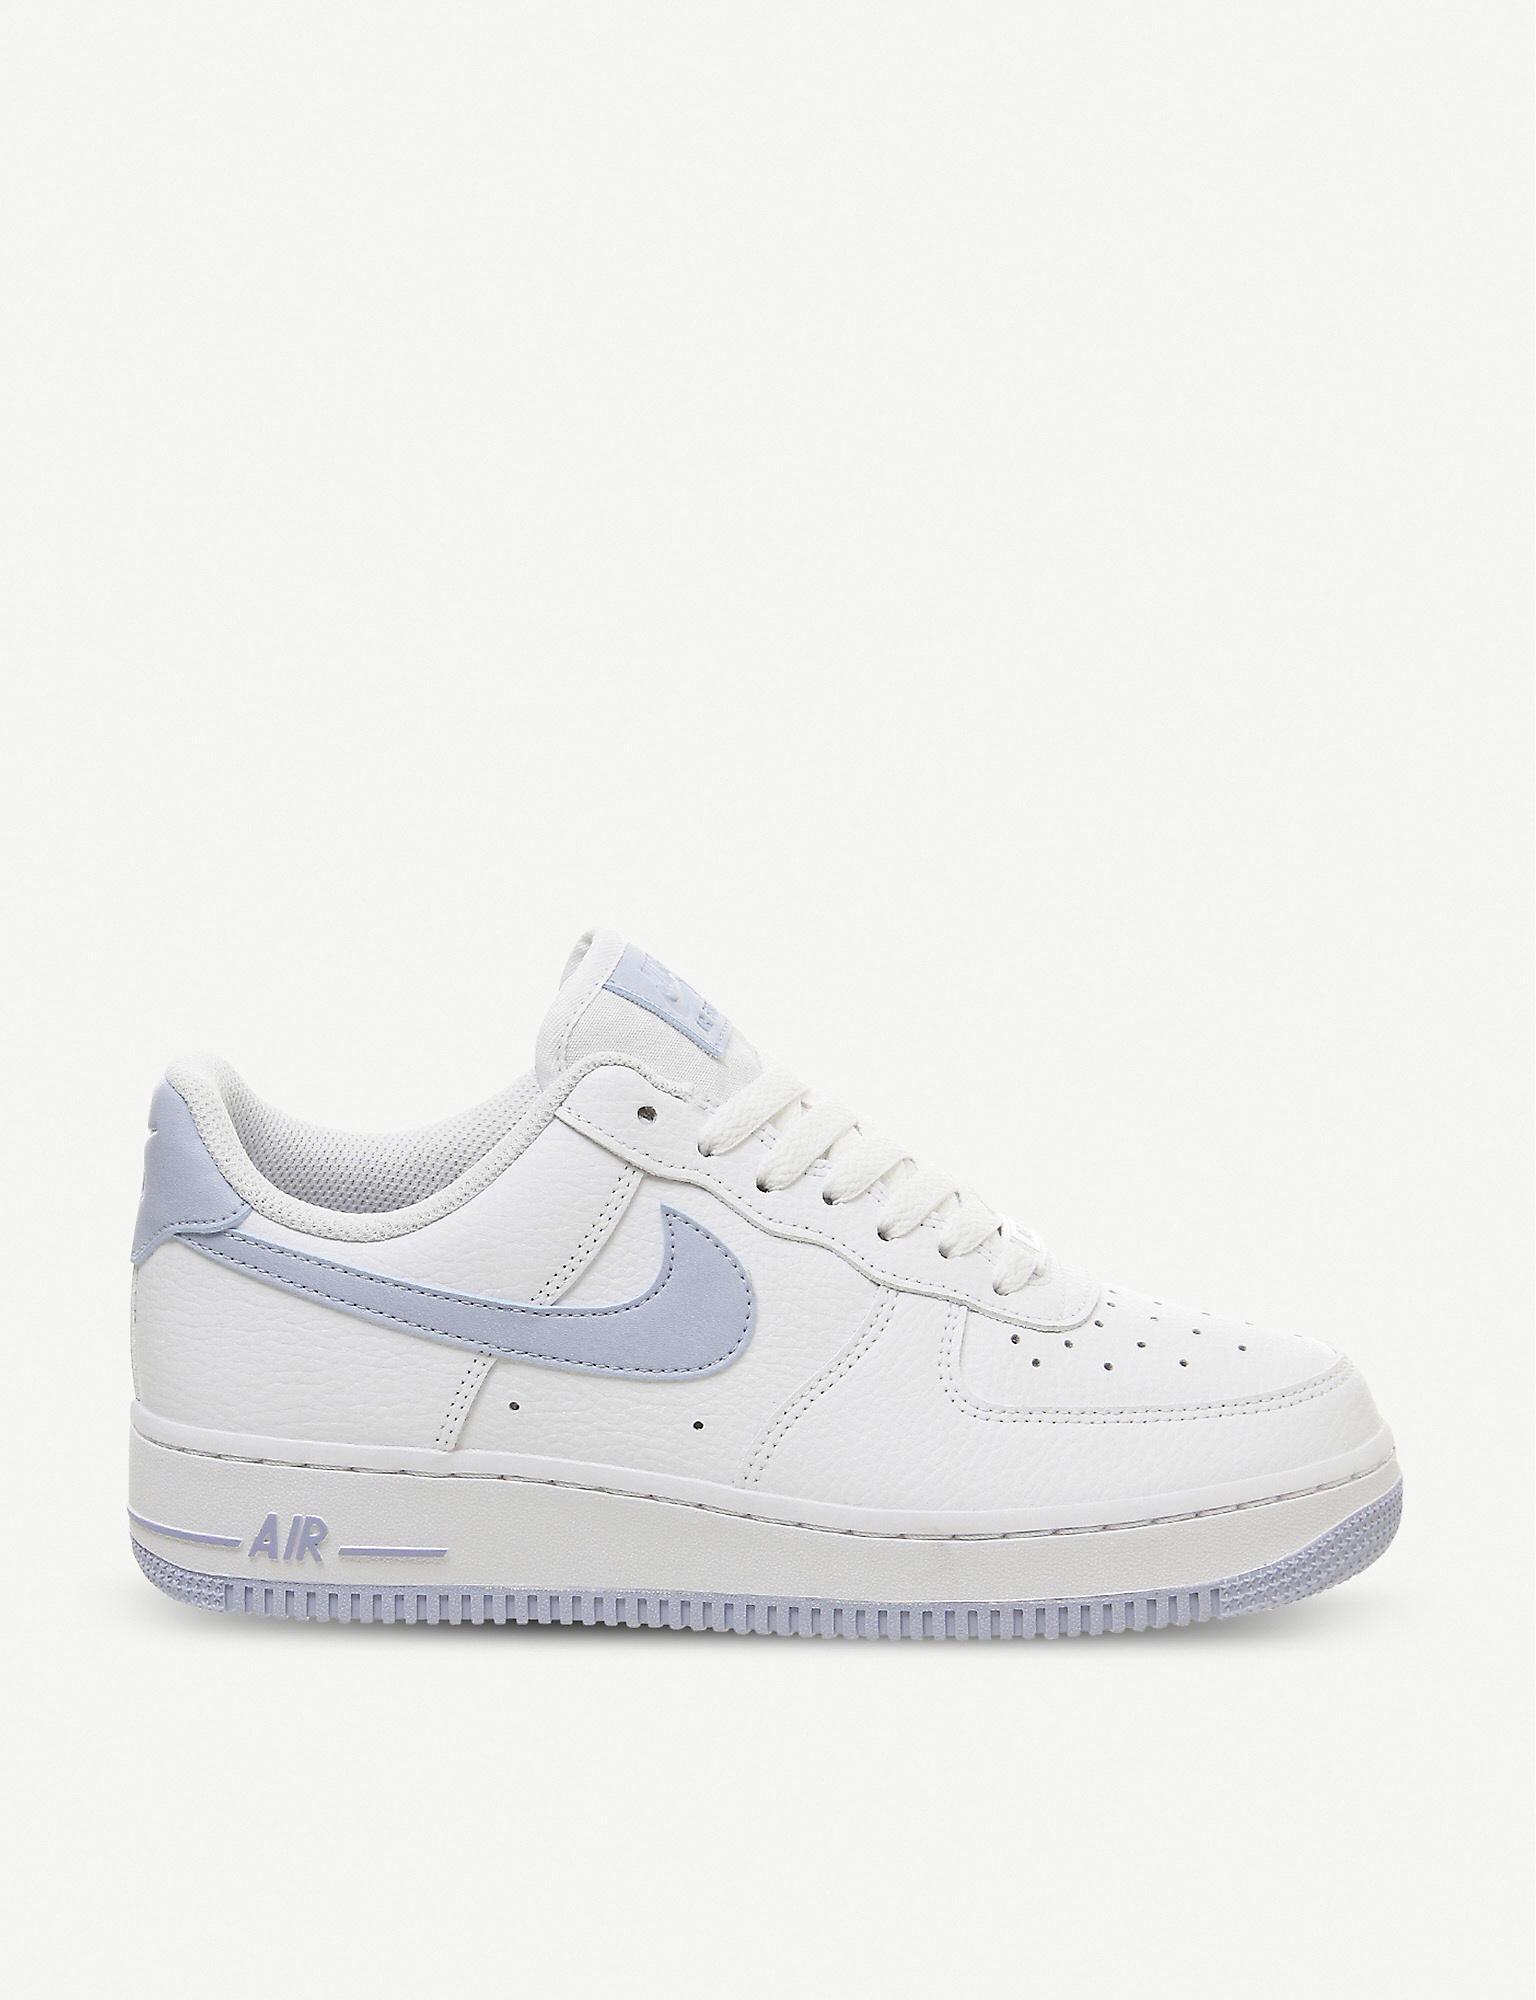 air force white trainers